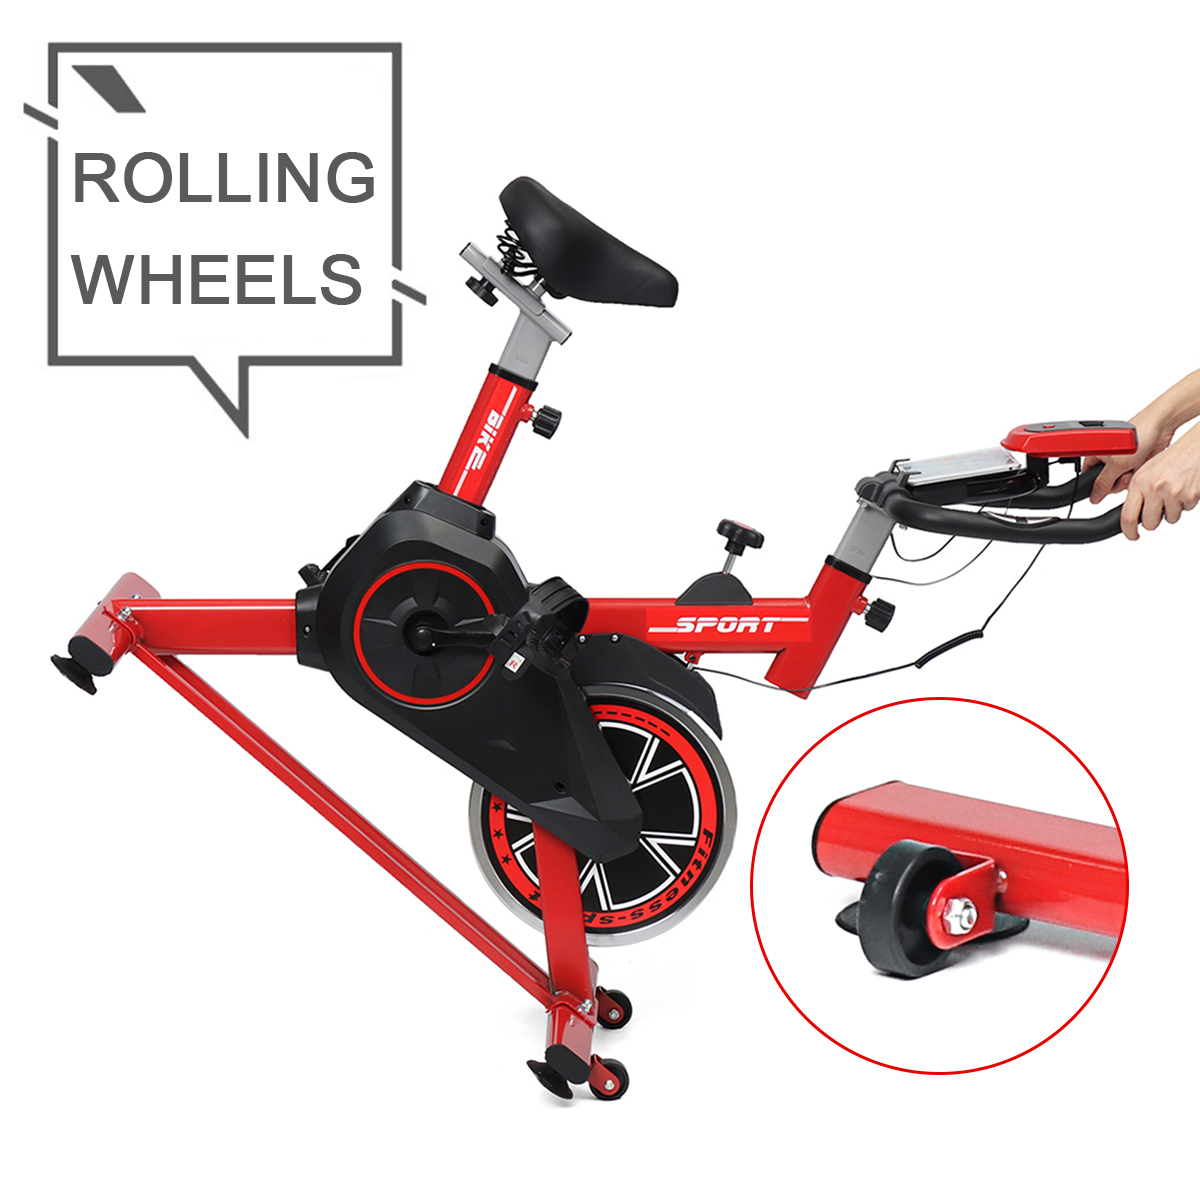 Exercise-Spinning-Bike-Professional-Home-Cycling-Fitness-Bicycle-Belt-Drive-1707253-6